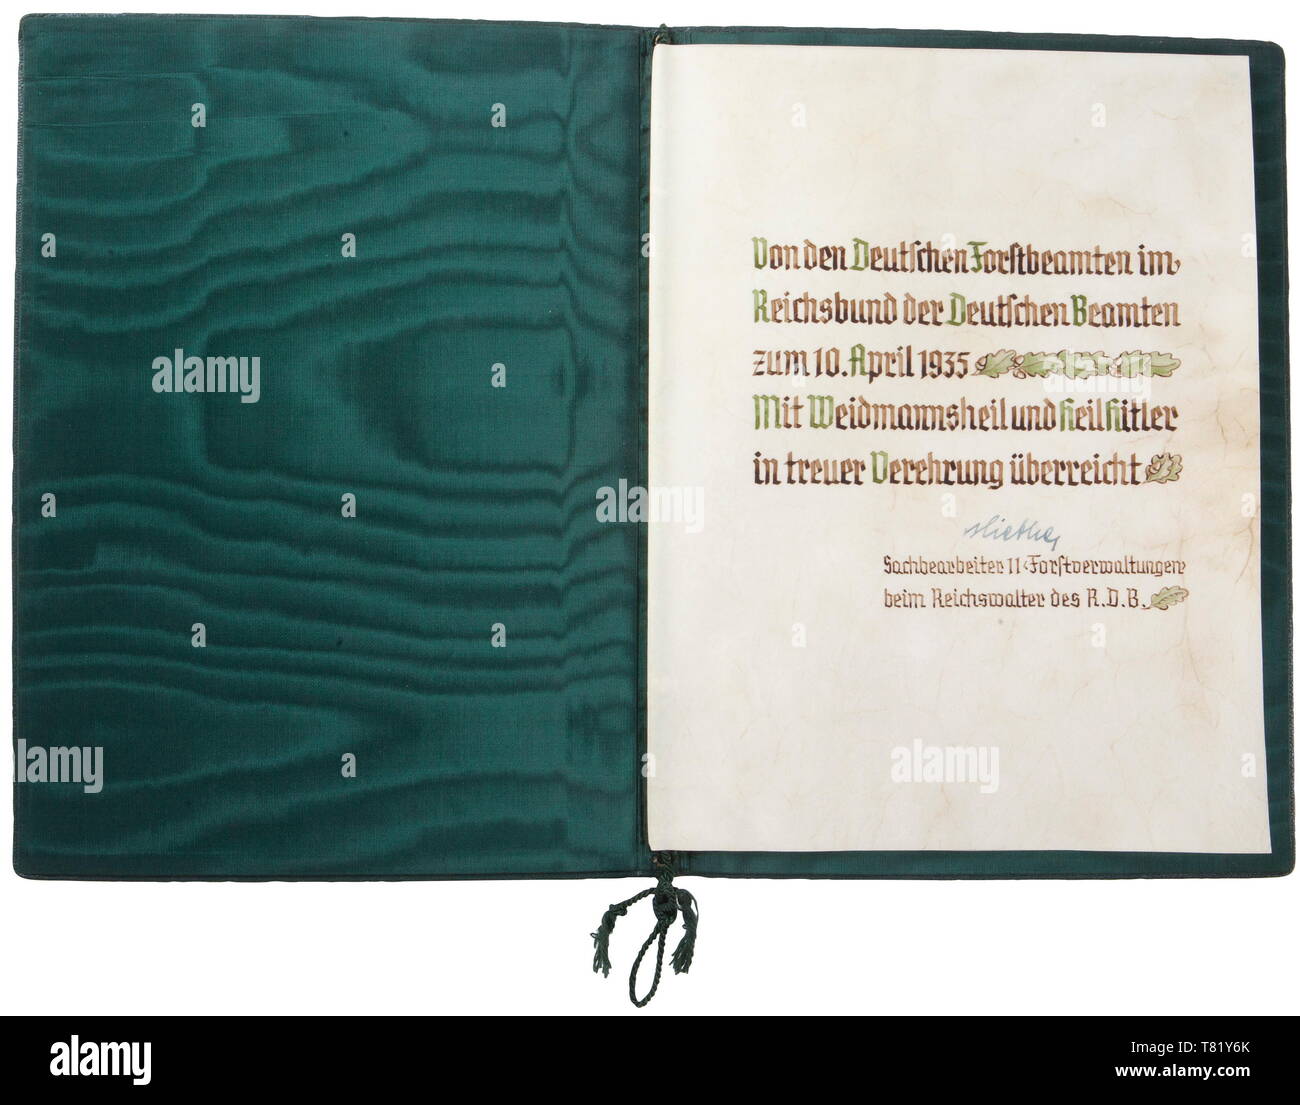 Hermann Göring - congratulations on his marriage to Emmy Sonnemann. A green leather binding containing fine multi-coloured calligraphy on parchment, 24 x 32.5 cm. From the German forestry officials in the National Association of German Officials 10 April 1935. Presented in loyal admiration with woodsman's greeting and Heil Hitler! Hand-signed, Specialist II / Forestry Administrations, The National Governor of the R. D. B. (National Association of German Officials) From the possession of a US officer of the 101st Airborne Division, among the first US units on the Obersalzber, Editorial-Use-Only Stock Photo